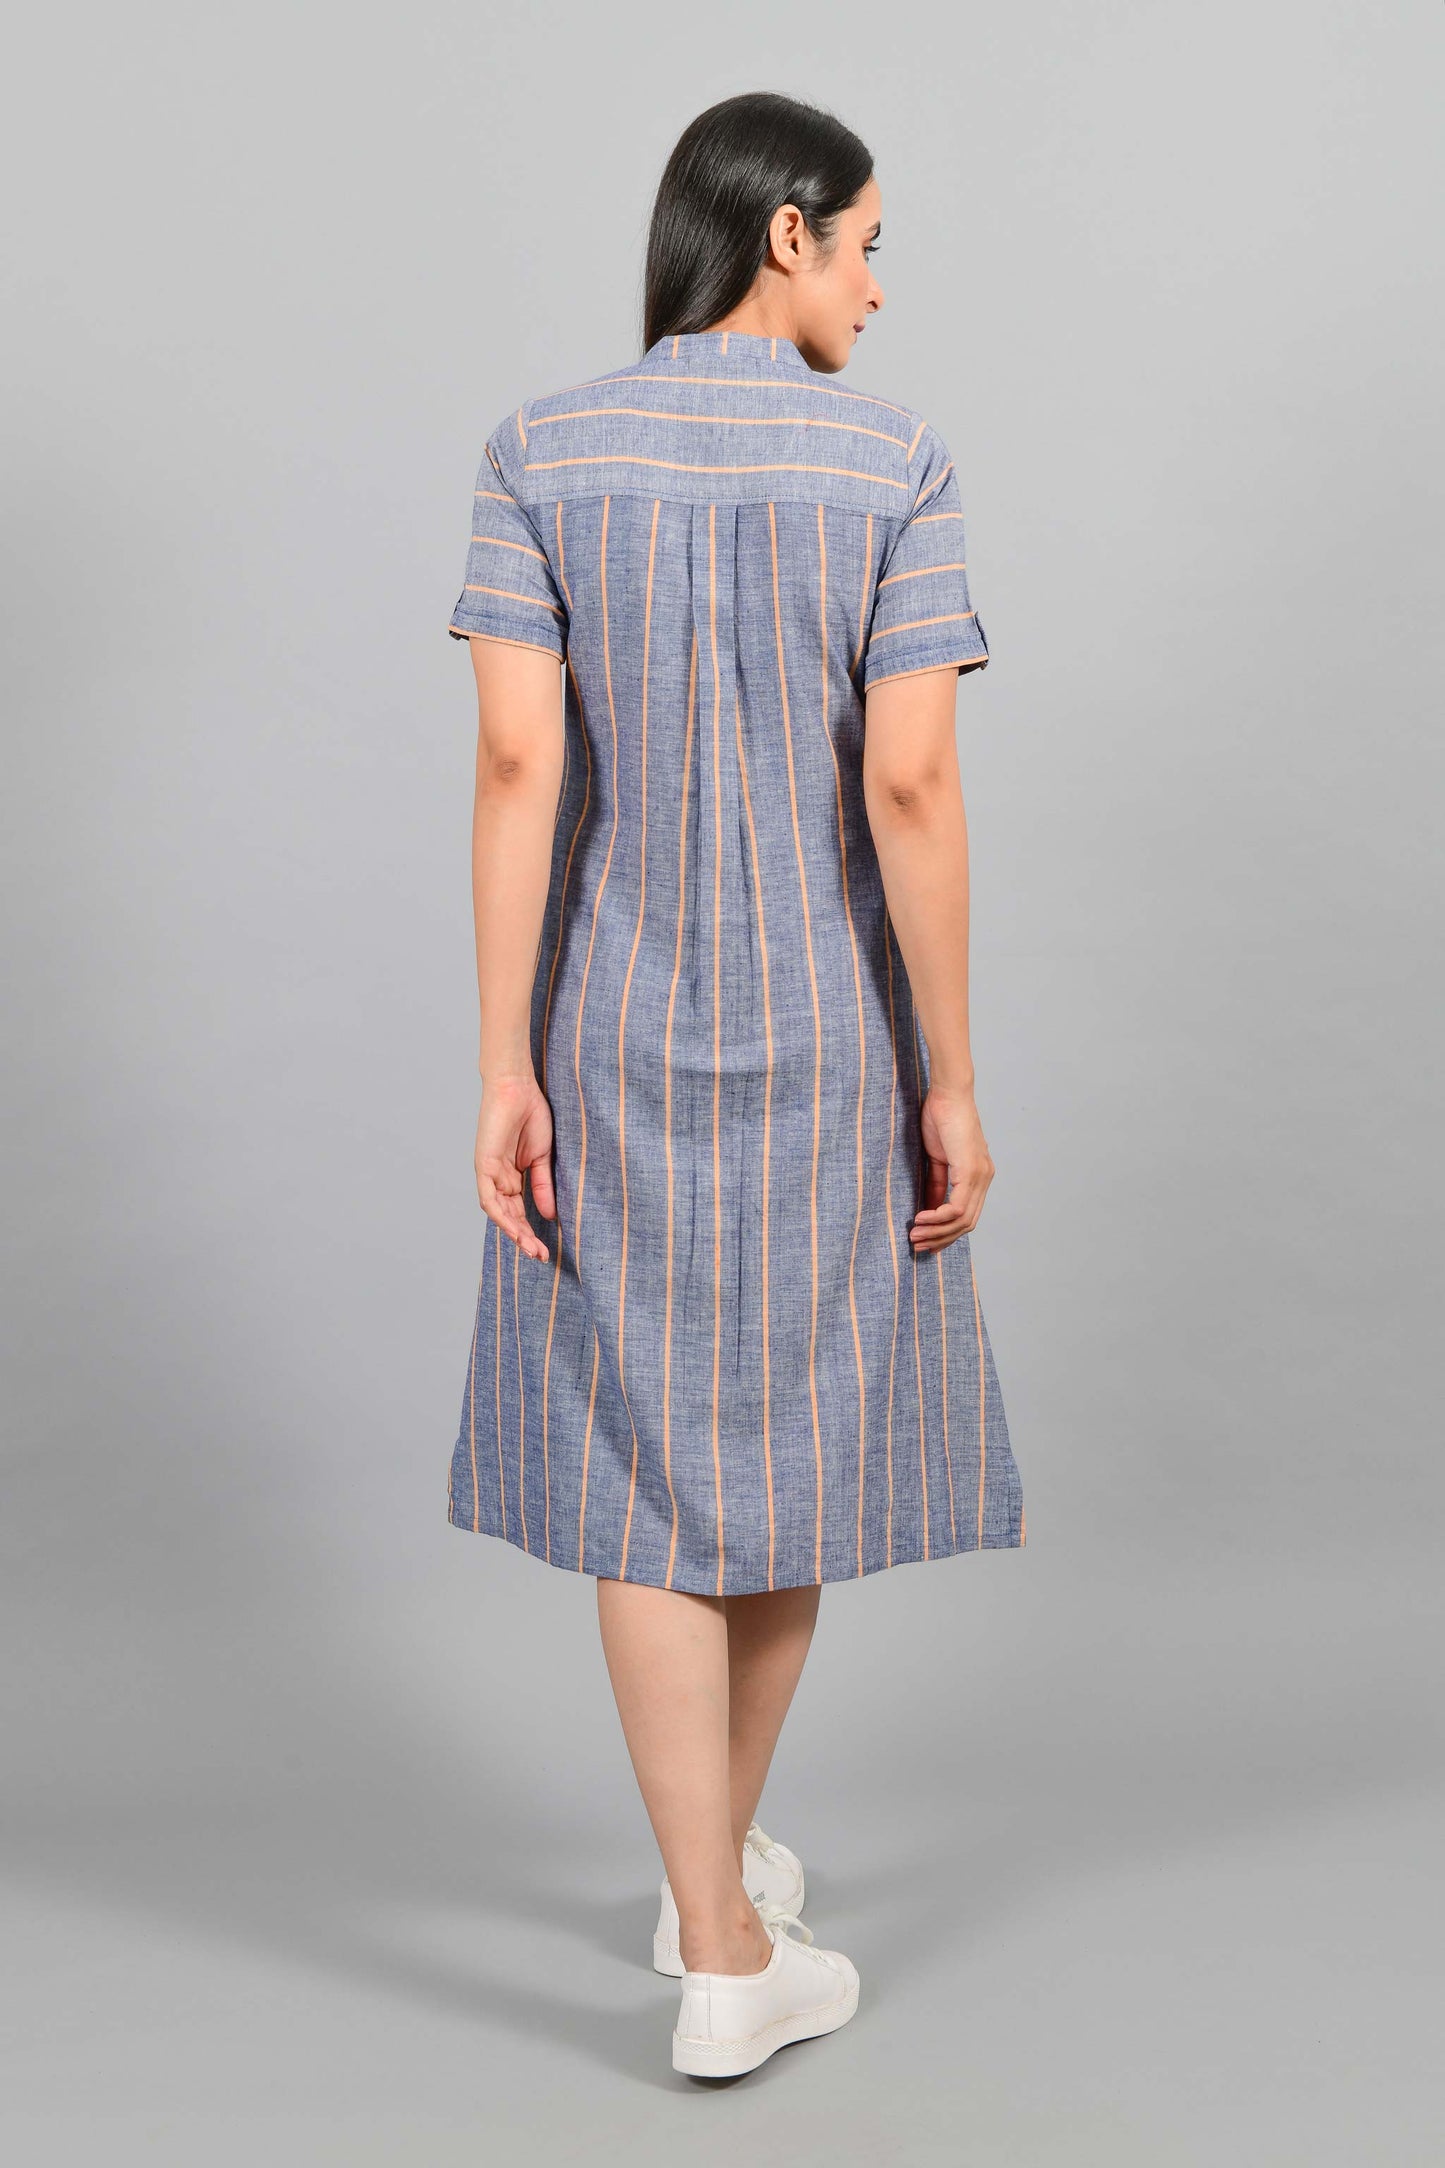 Back pose of an Indian female womenswear fashion model in a Blue chambray with orange stripes handspun and handwoven khadi cotton dress-kurta by Cotton Rack.